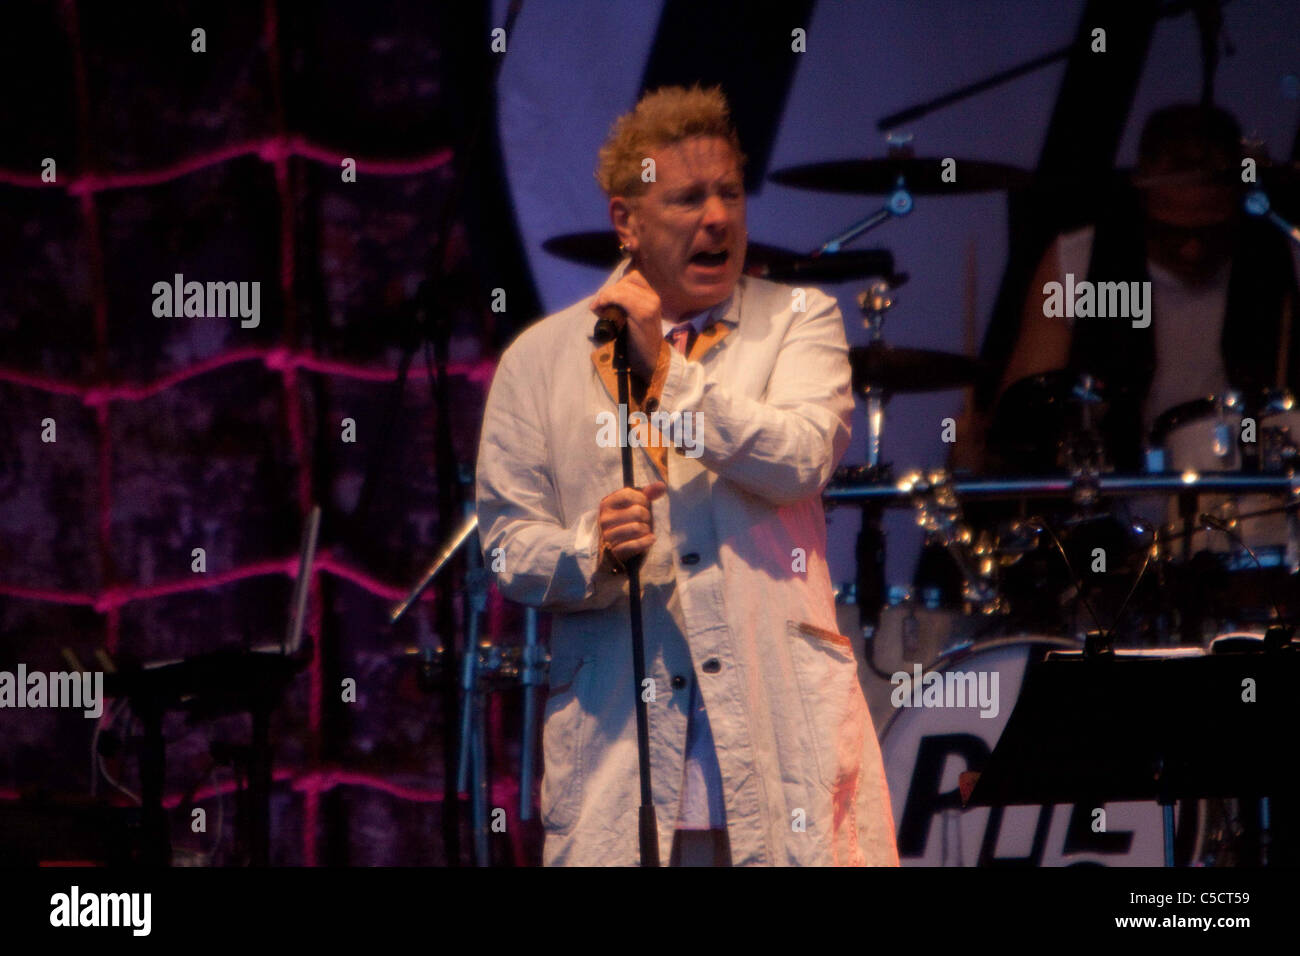 Public Image Limited (PIL) performing at Guilfest 2011 Stock Photo